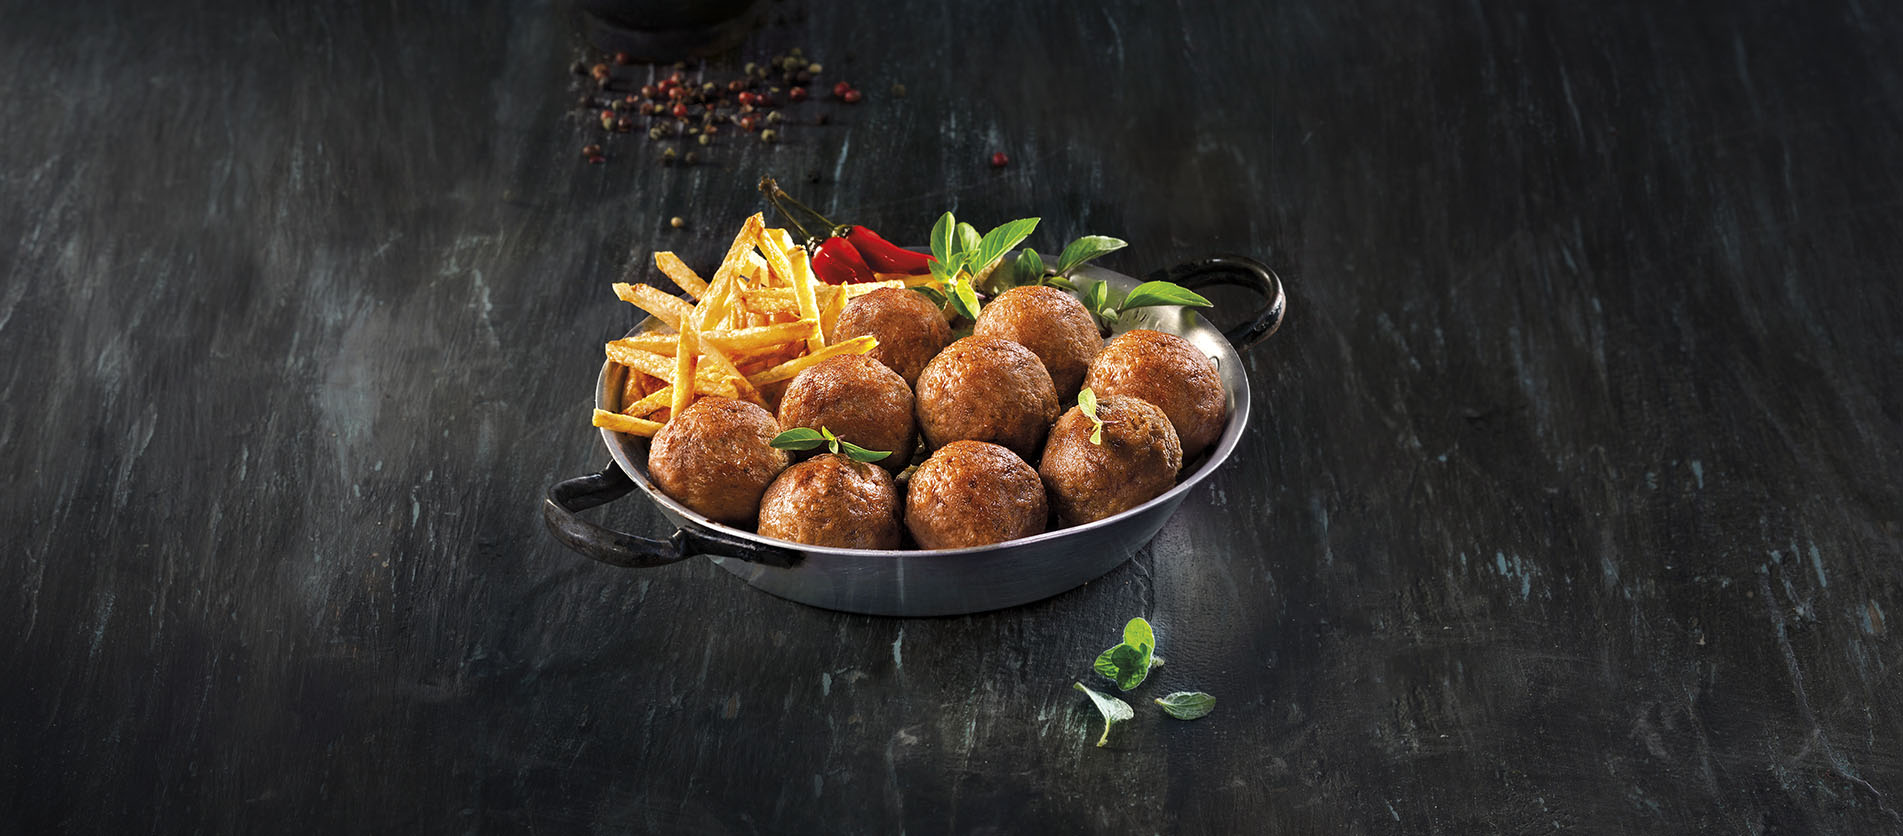 Recipes With Meatballs